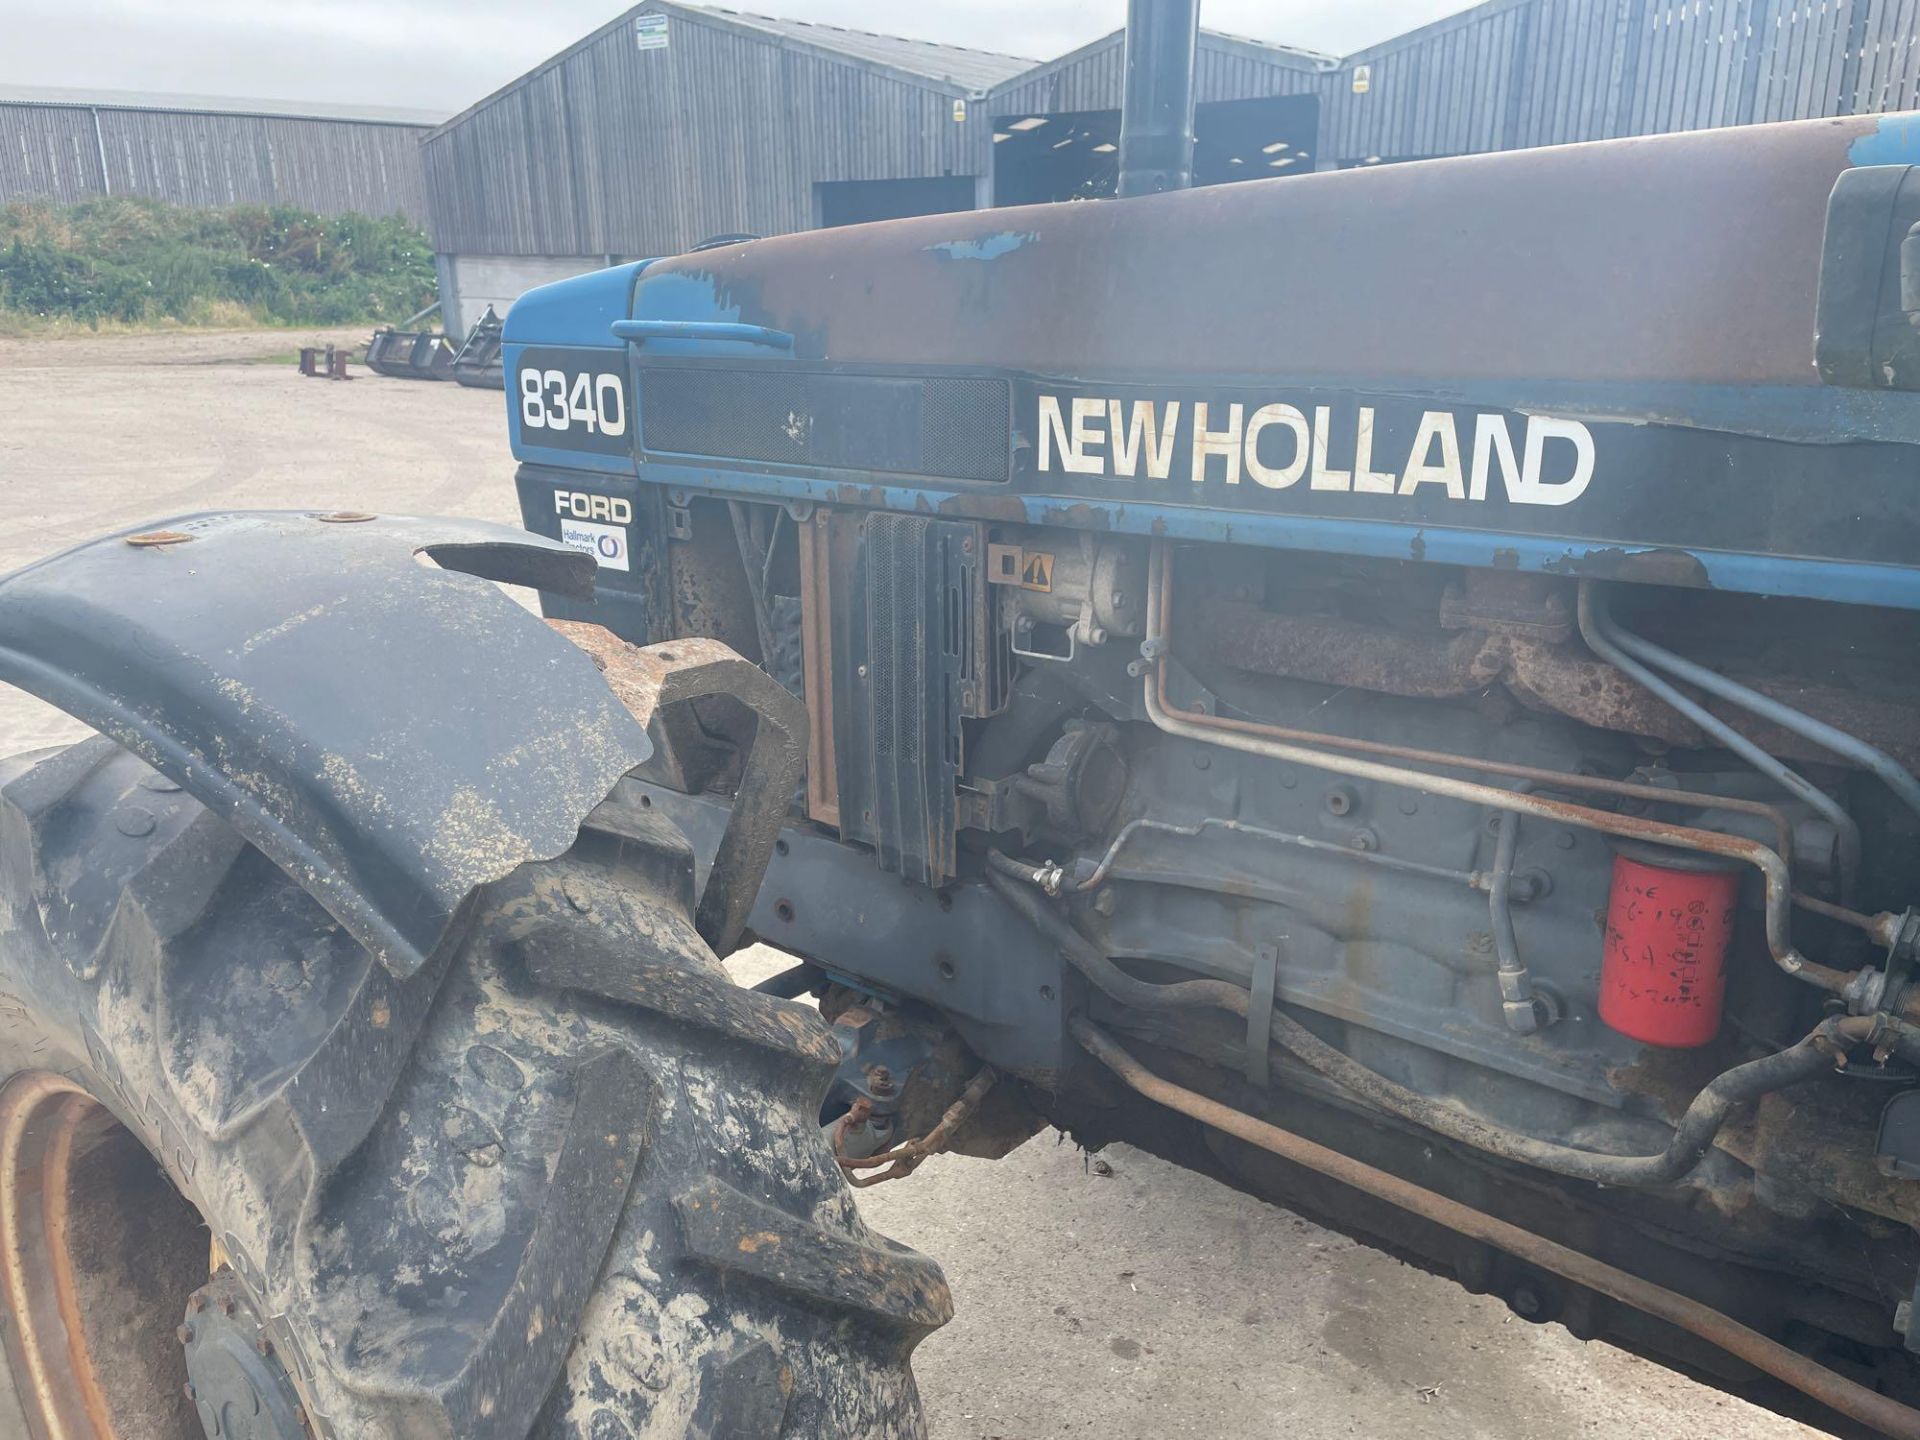 1997 New Holland 8340 4wd tractor with 2 manual spools on 14.9R28 front and 18.4R38 rear wheels and - Image 20 of 22